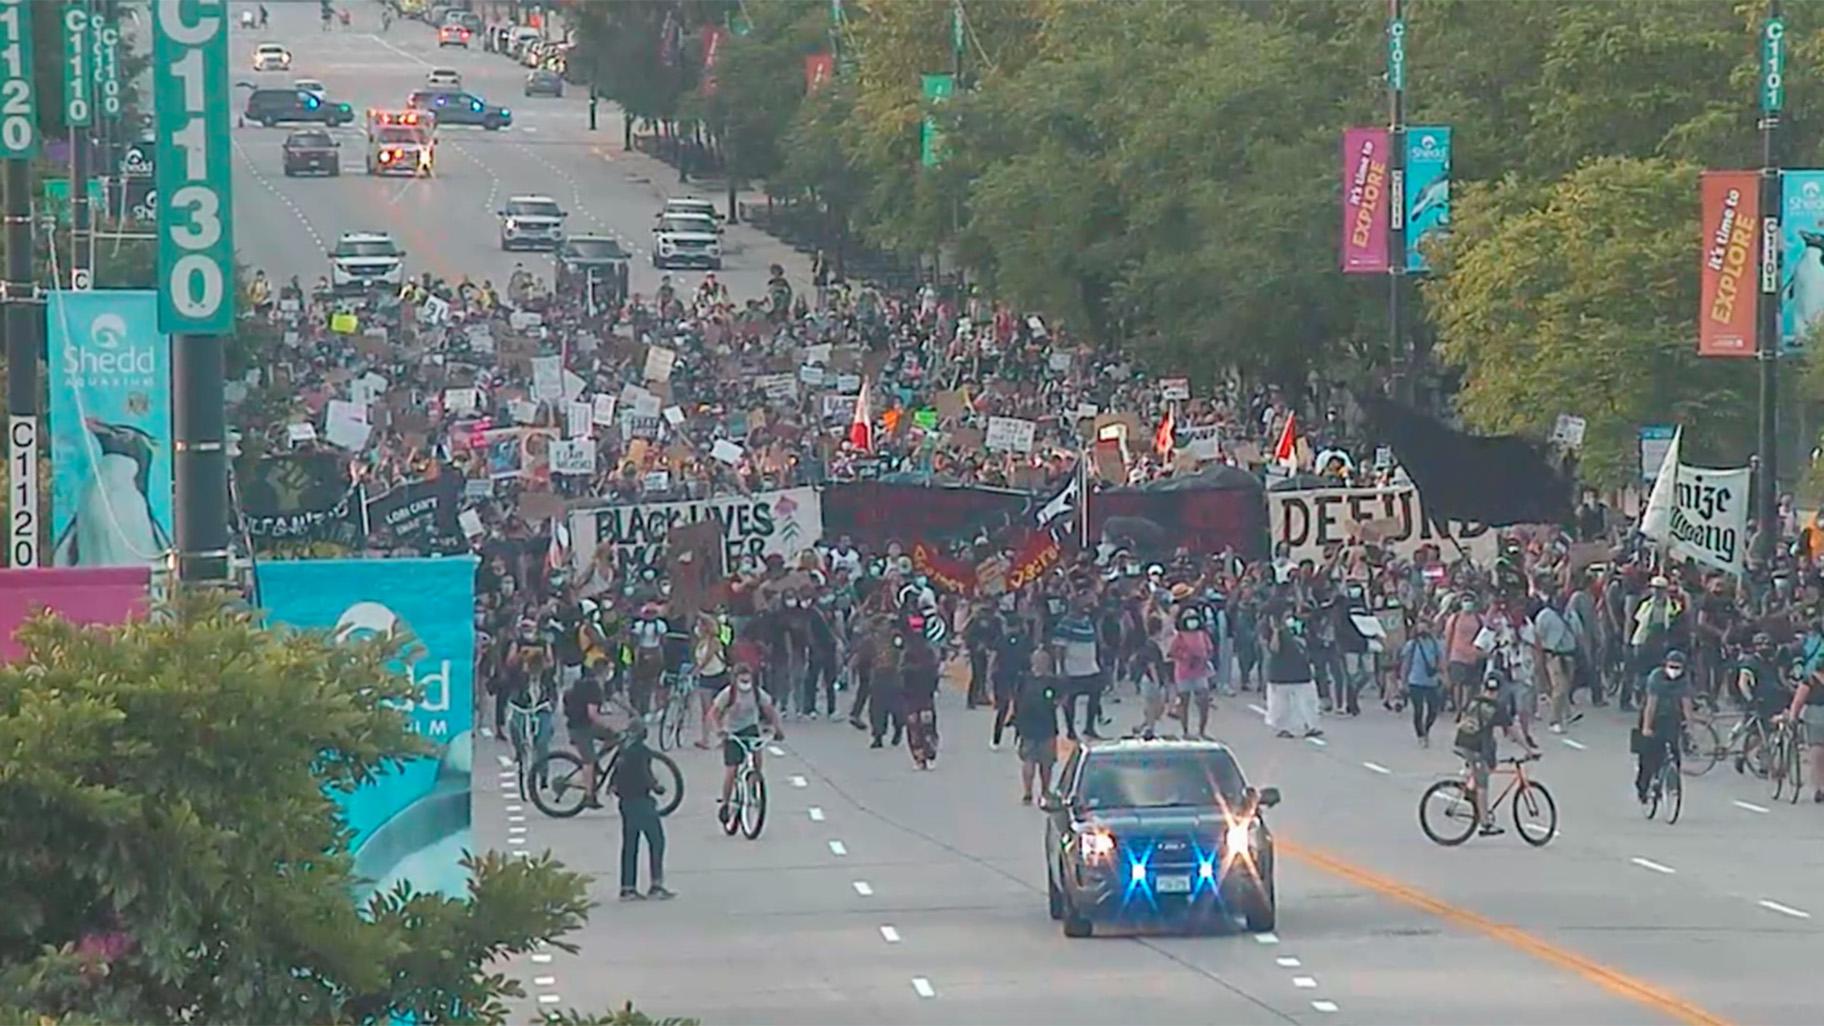 Surveillance footage released by the Chicago Police Department shows protesters marching toward the Christopher Columbus statue on July 17, 2020 evening. (Chicago Police Department)